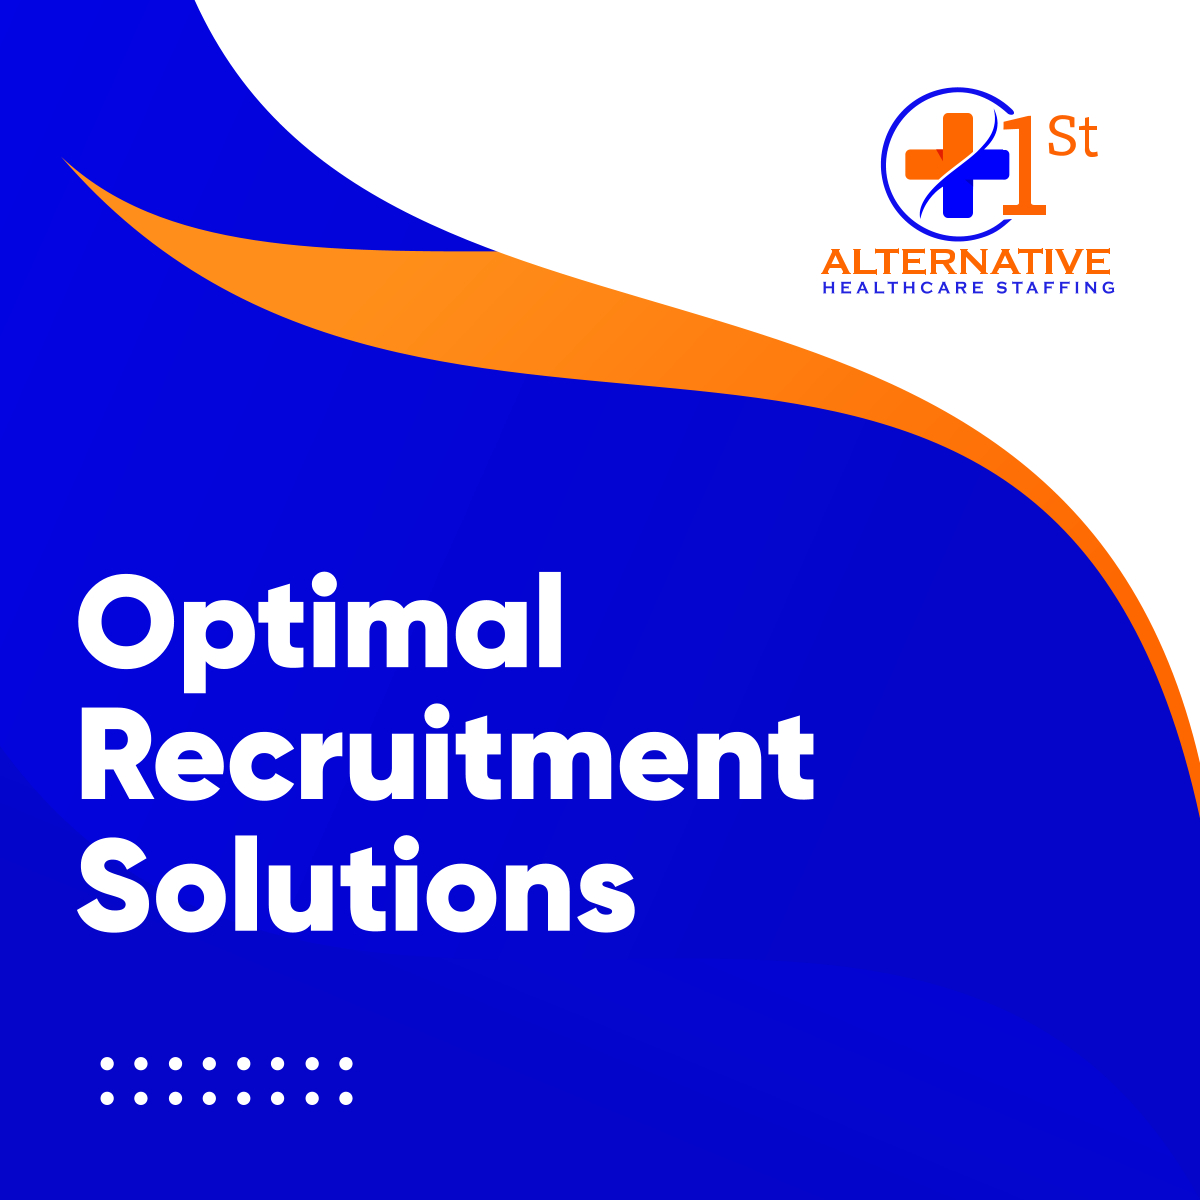 1st Alternative Healthcare Staffing LLC is committed to finding the best people for your agency. Our optimal recruitment solutions will bring you impeccable results that will surely improve your patients’ overall healthcare solutions.

#RecruitmentSolution